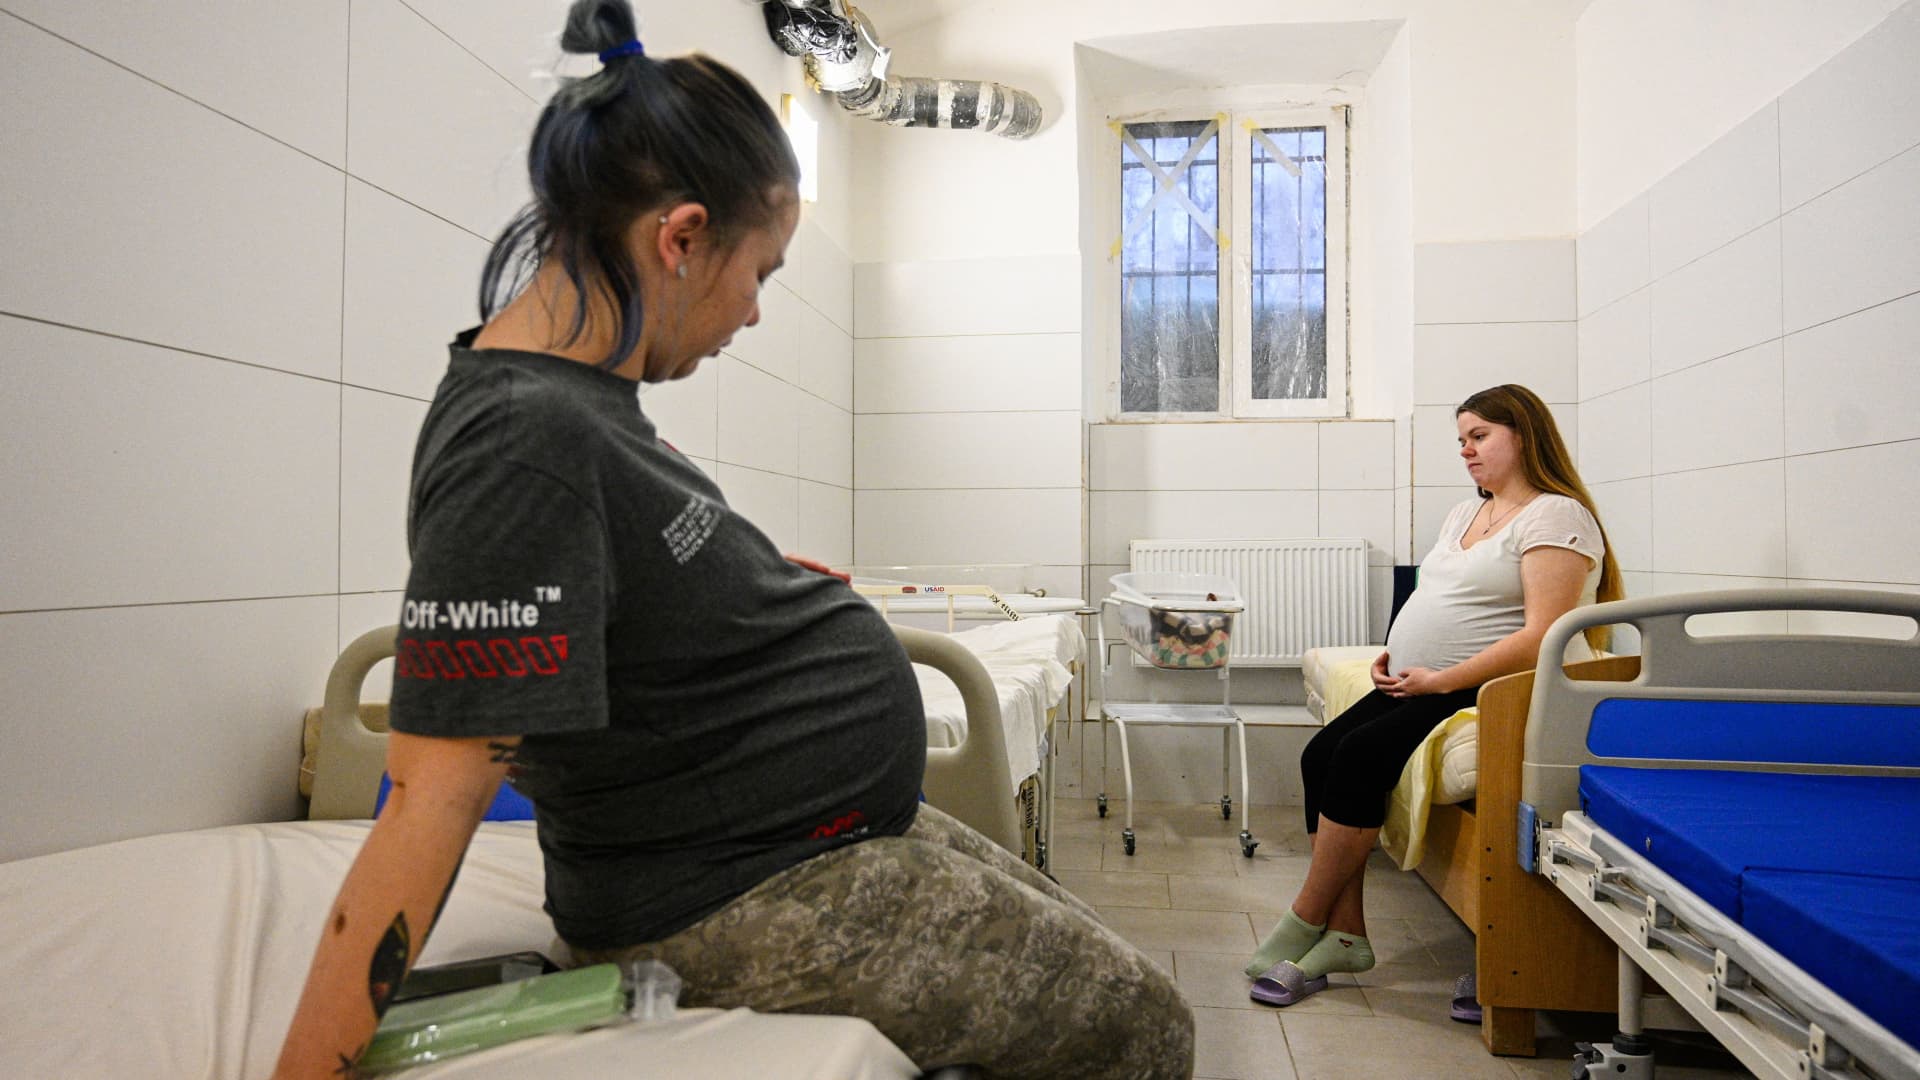 Women's rights groups are calling for greater regulation of the commercial surrogacy industry.